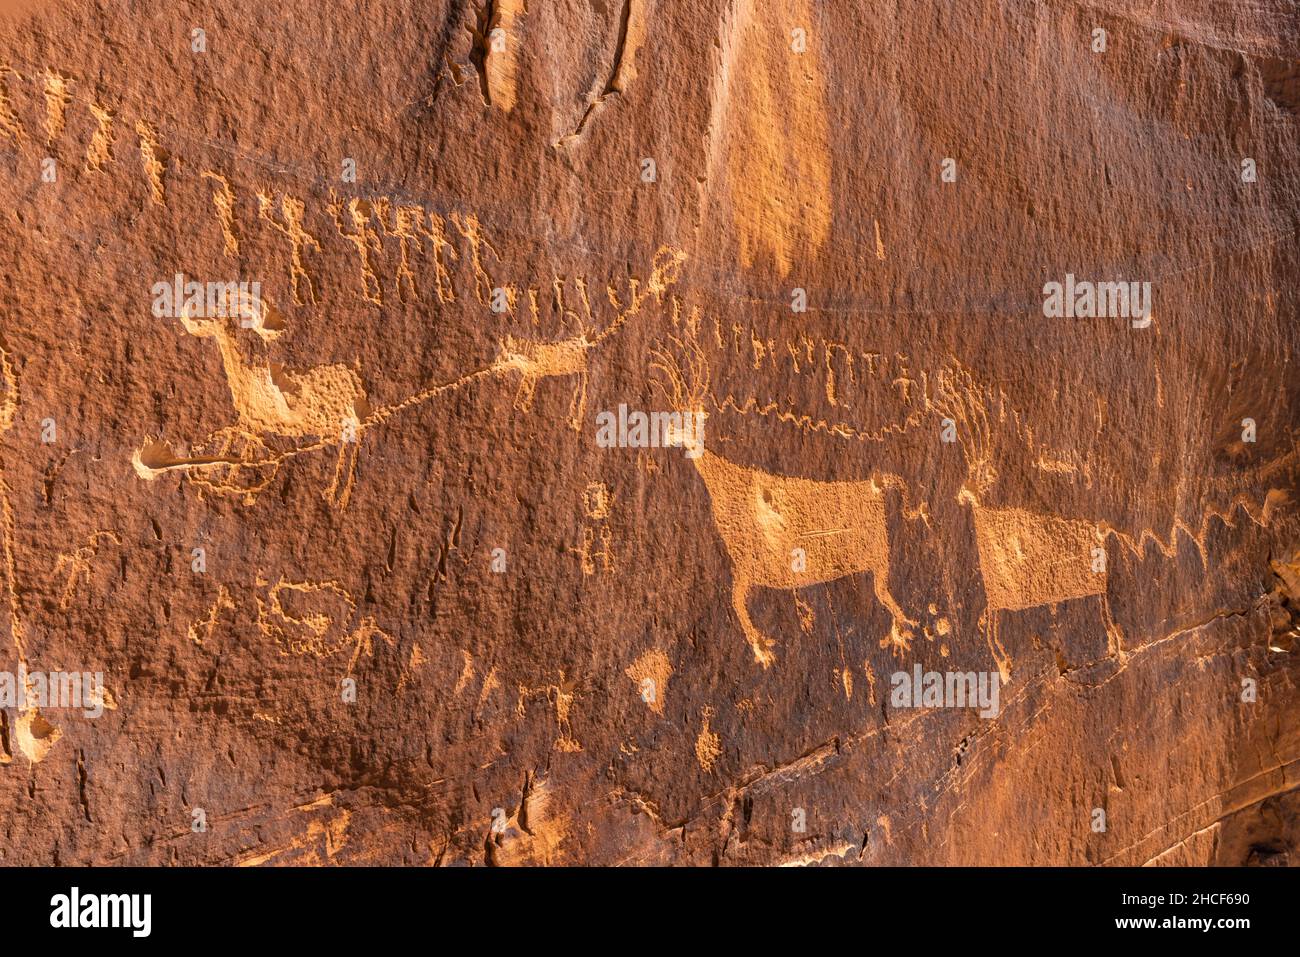 The Procession Panel, a well-known Ancetral Puebloan petroglyph panel near the top of Comb Ridge in Bears Ears National Monument, Utah. Stock Photo